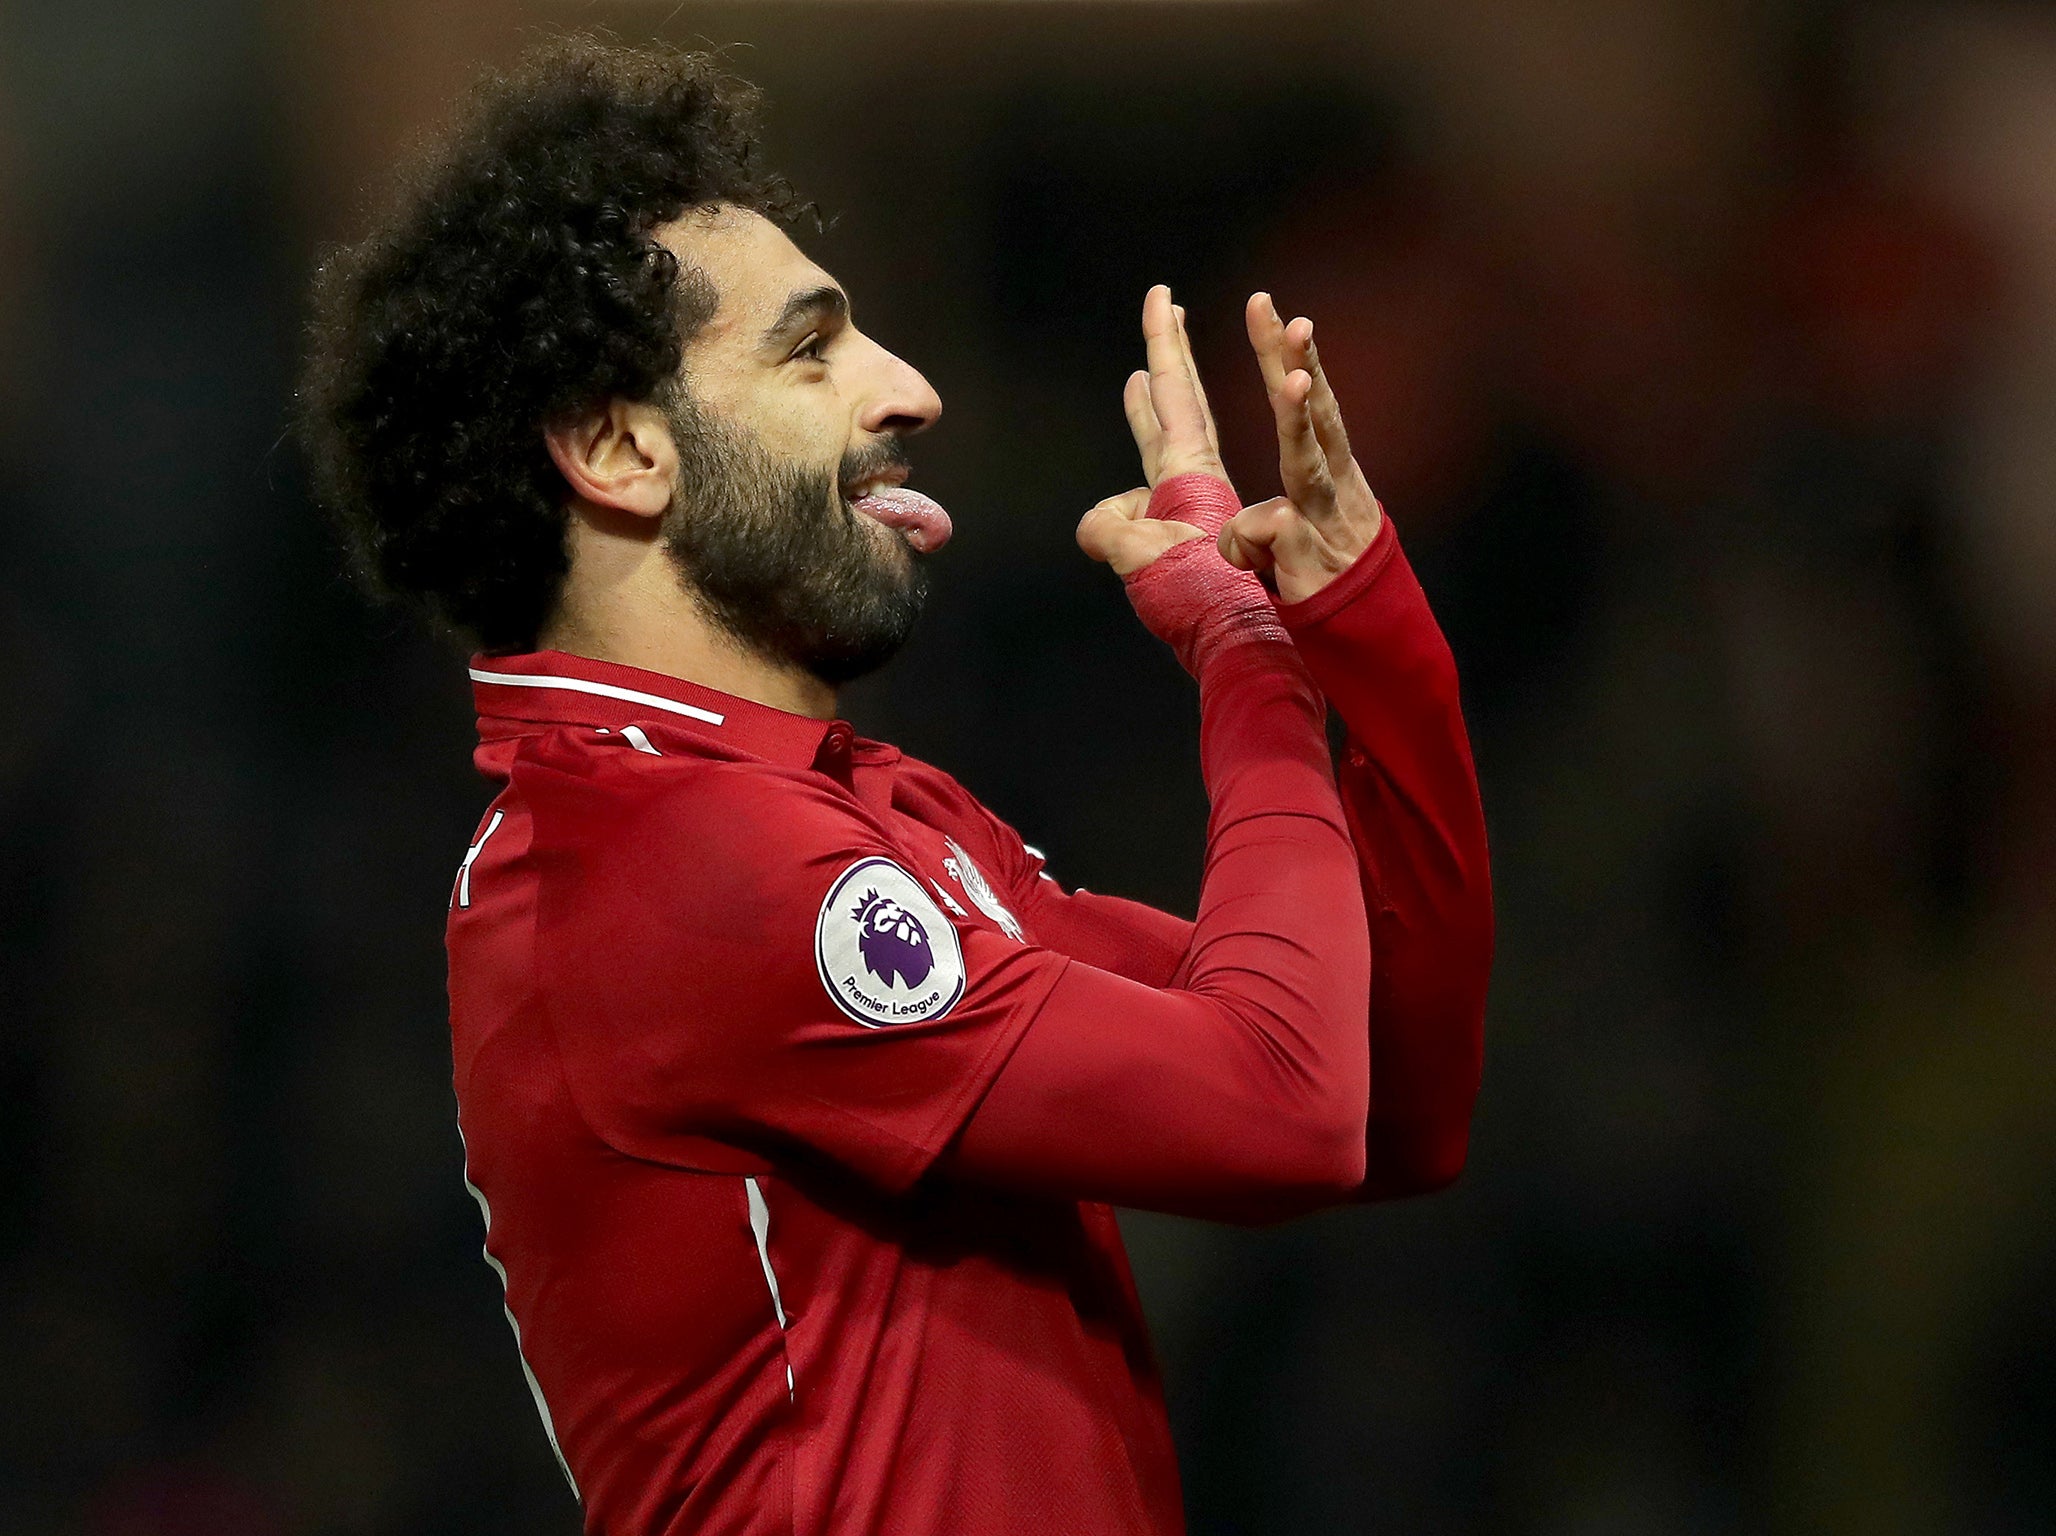 Mo Salah will be looking to score against his former club